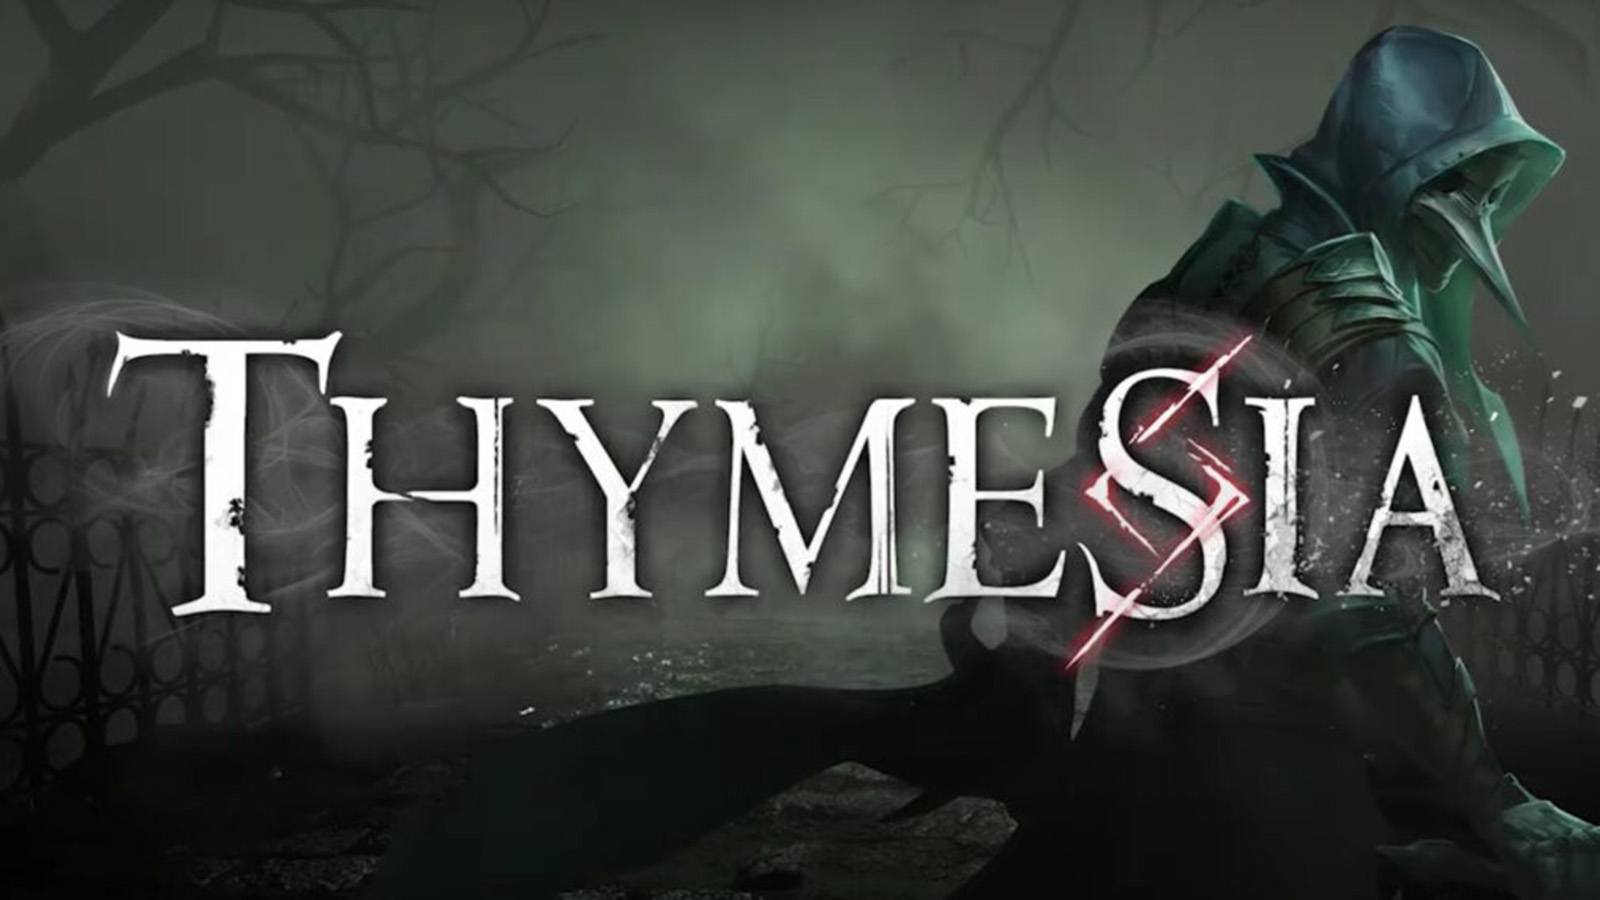 Dark Fantasy Action RPG Thymesia Gets August 2022 Release Date